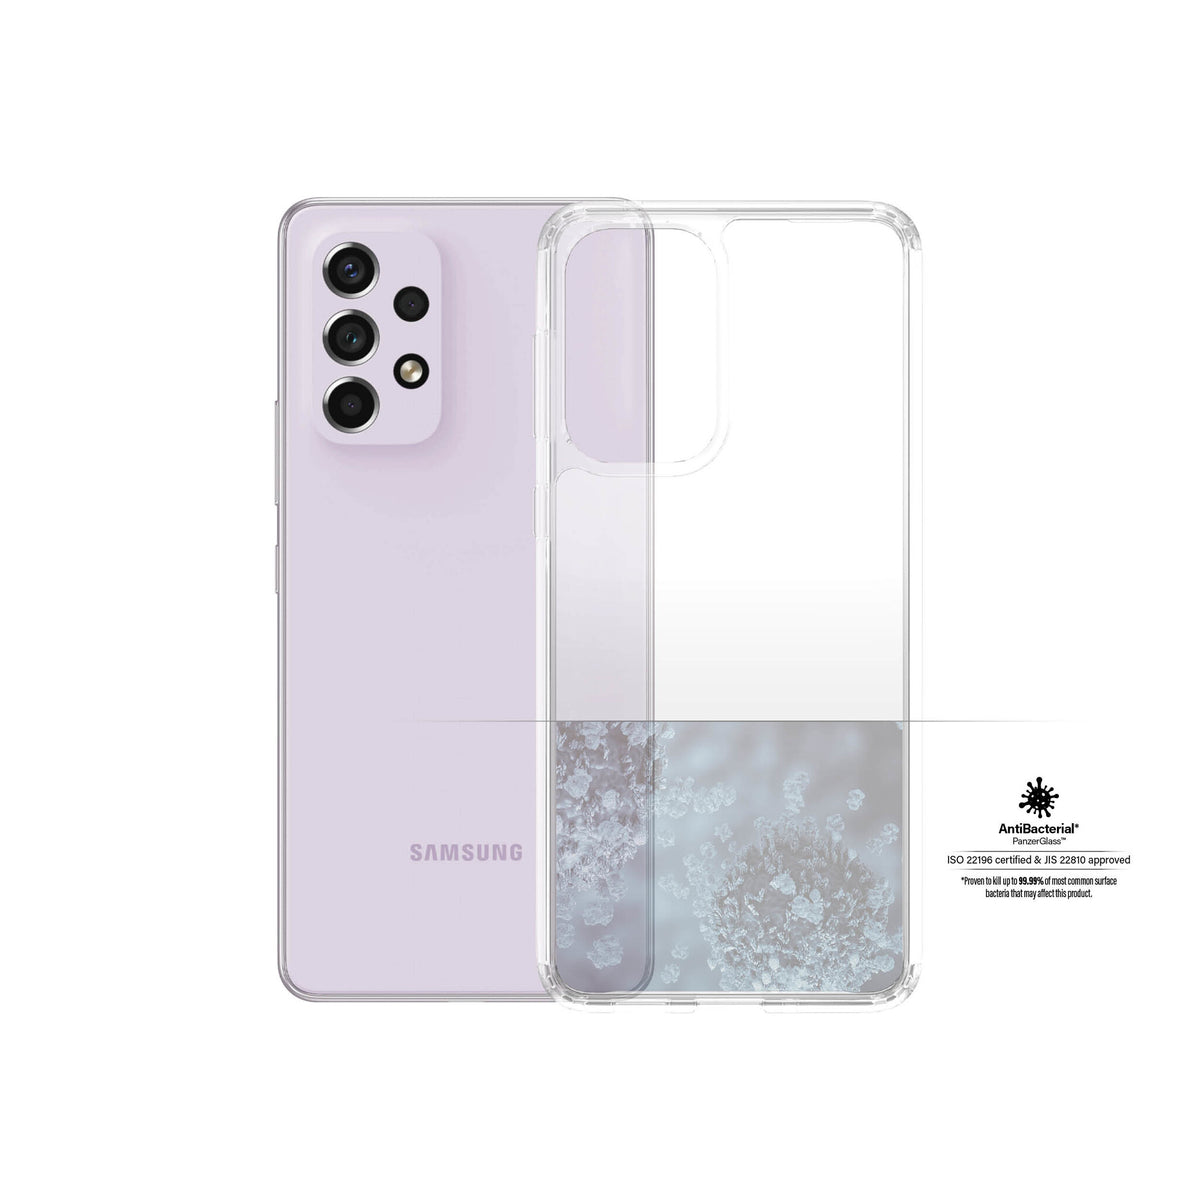 PanzerGlass ® HardCase for Galaxy A33 (5G) in Transparent